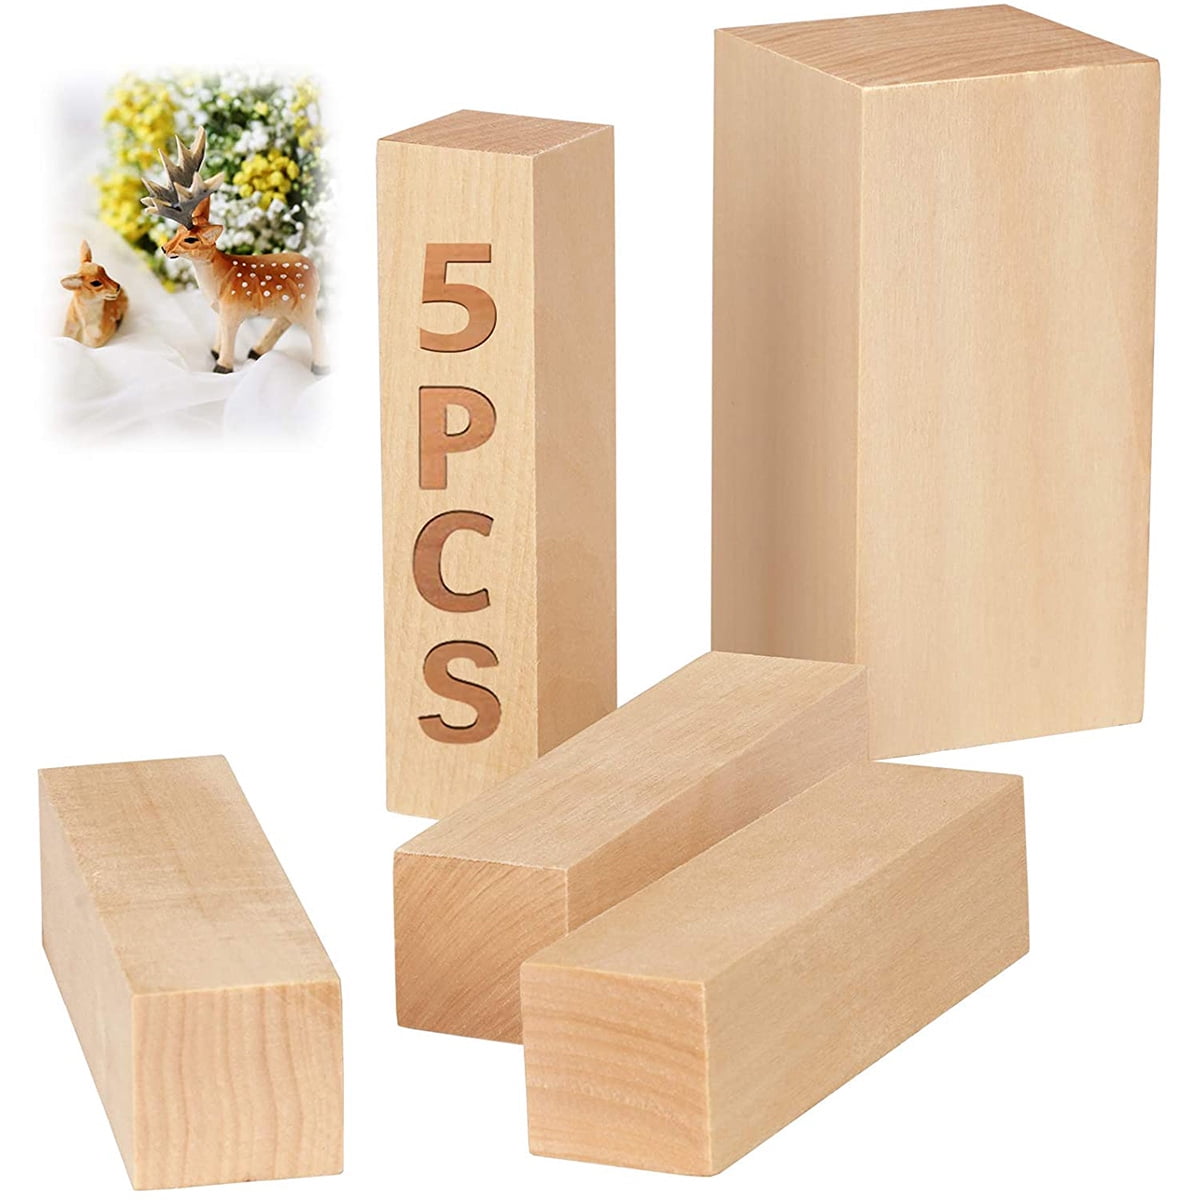 10 PCS Basswood Carving Blocks,Best Value Premium Smooth Unfinished Wood Blocks,Wood Carving Kit Suitable for Beginner to Expert Carvers and Whittling. 